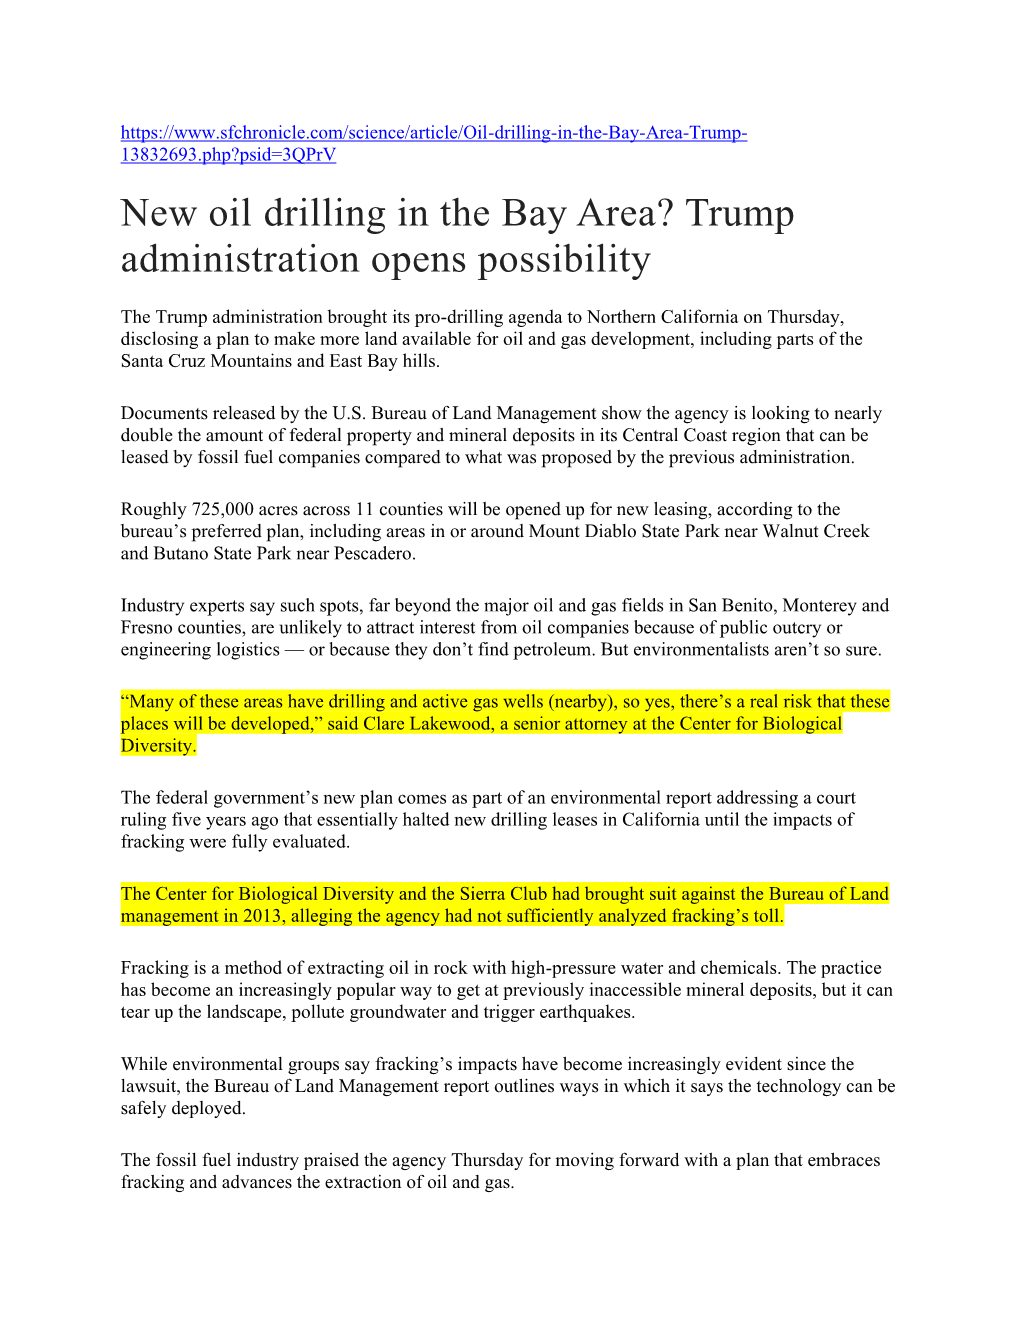 New Oil Drilling in the Bay Area? Trump Administration Opens Possibility